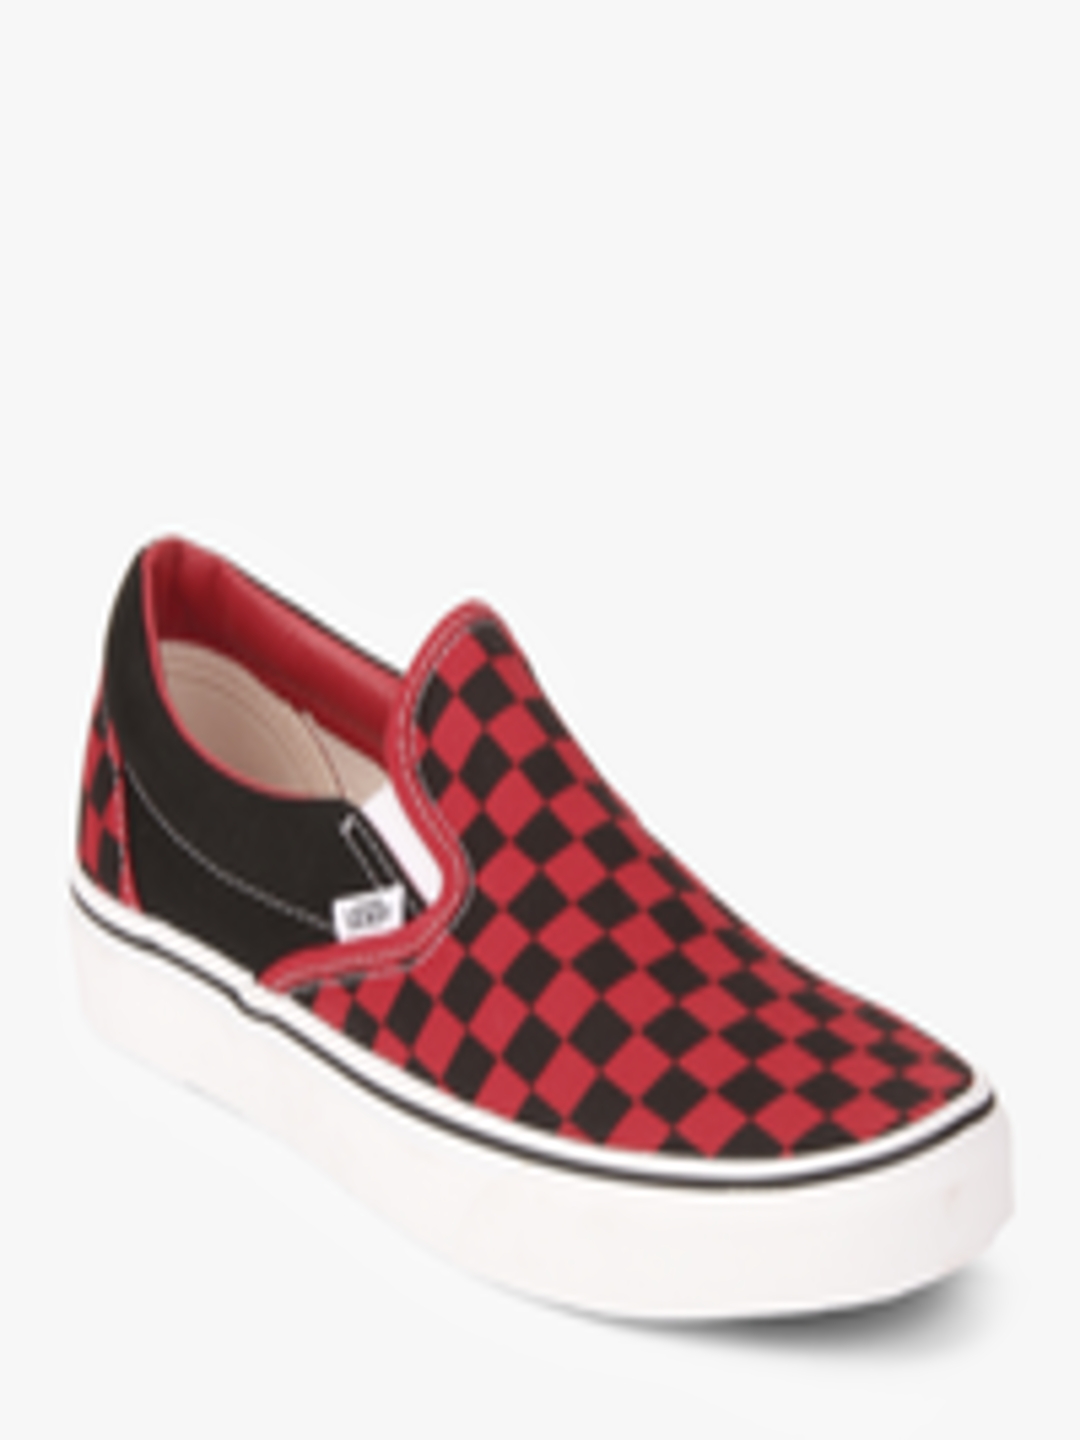 Buy Classic Red Sneakers - Casual Shoes for Unisex 7442276 | Myntra